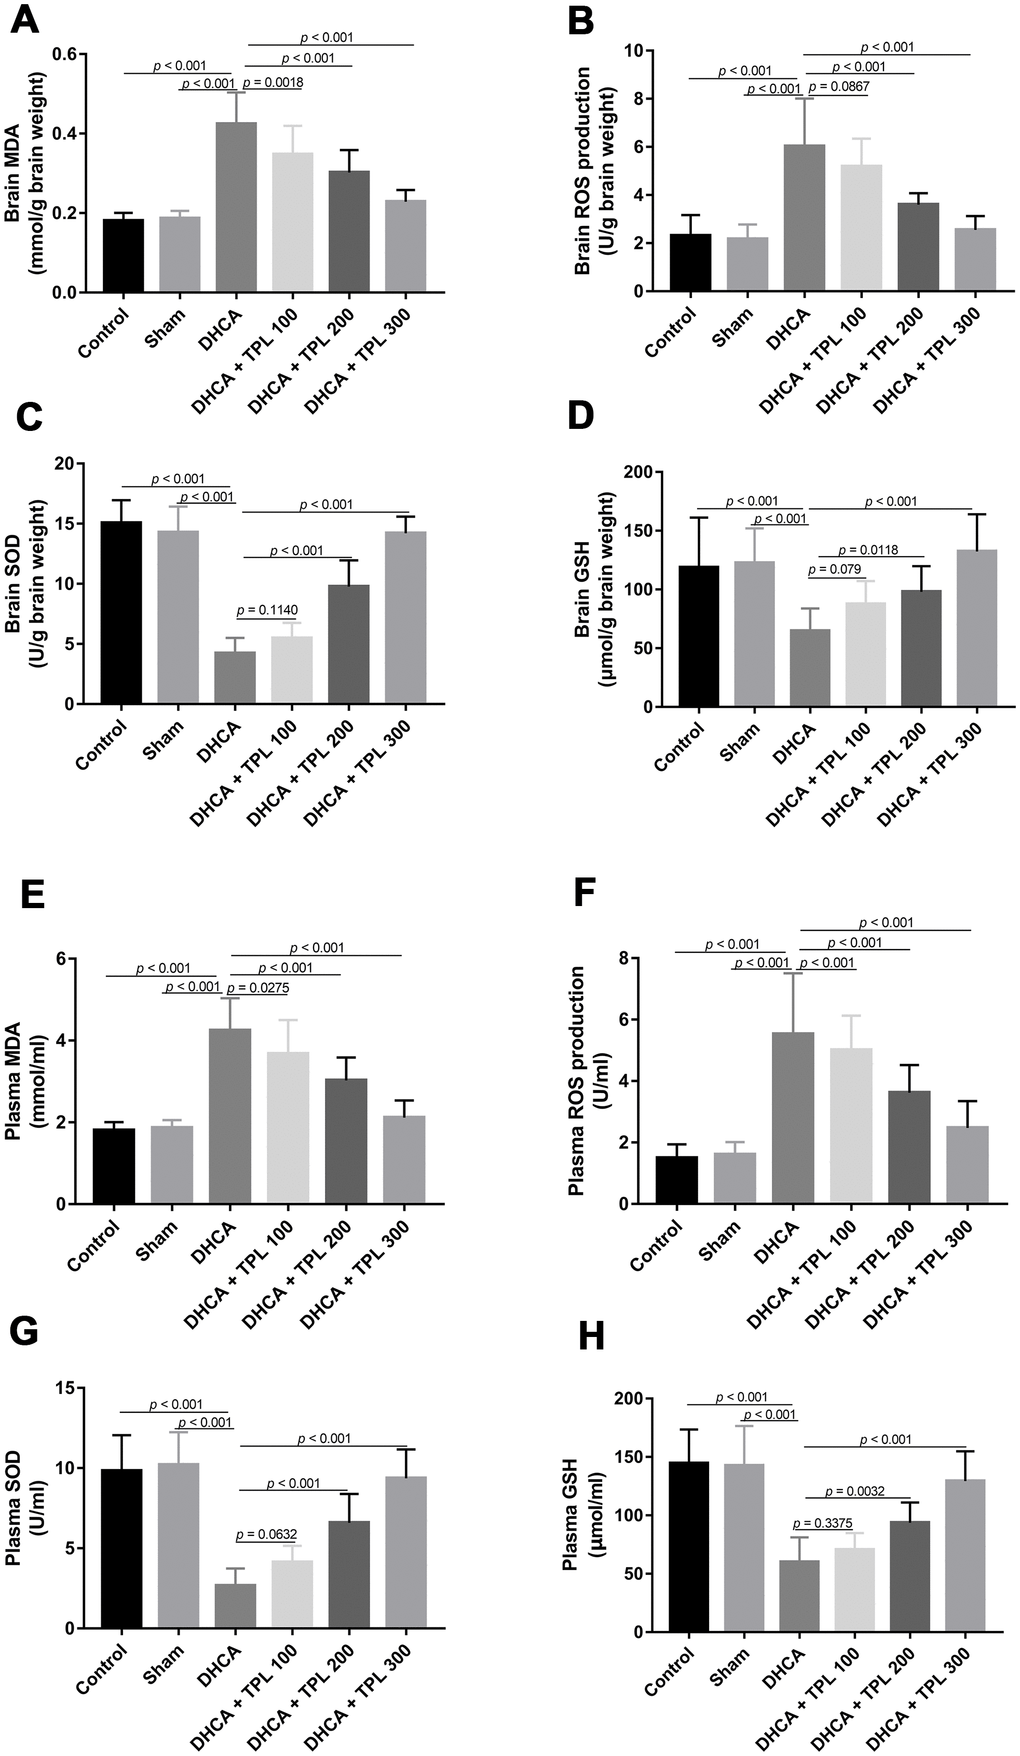 TPL inhibited DHCA induced oxidative stress in rats. On day 7 post operation, rats were euthanized and collected plasma and brain tissues to evaluate oxidative stress. The levels of brain MDA (A) and ROS production (B) were decreased with TPL treatment after DHCA. The activity of brain SOD (C) and GSH (D) was increased with TPL treatment after DHCA. Meanwhile, TPL treatment reduced plasma MDA (E) and ROS production (F) levels and increased the activities of SOD (G) and GSH (H) after DHCA. Values were presented as x¯±s (n = 10). Values were presented as x¯±s (n = 10). A difference with P 